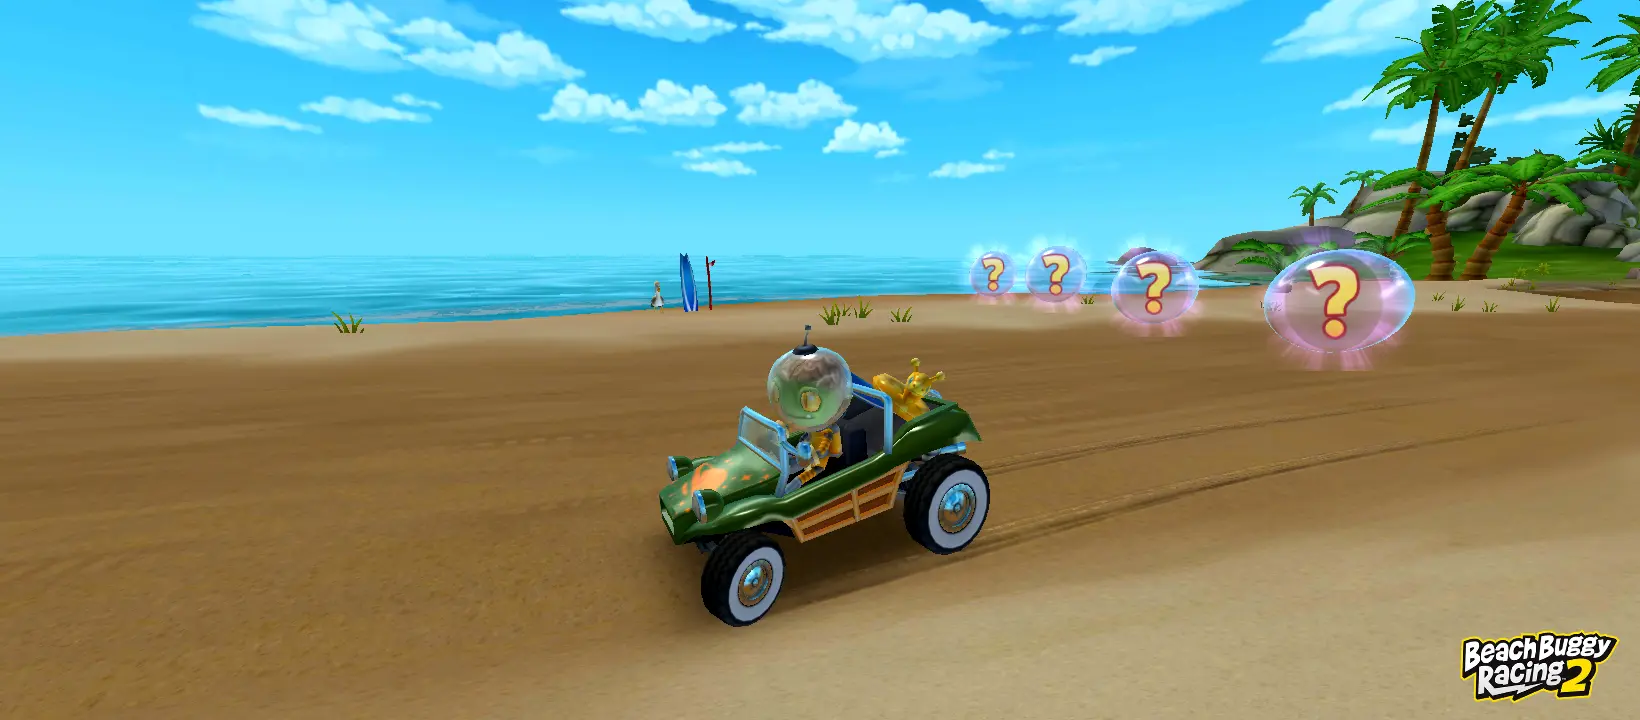 unlimited power-ups in beach buggy racing 2